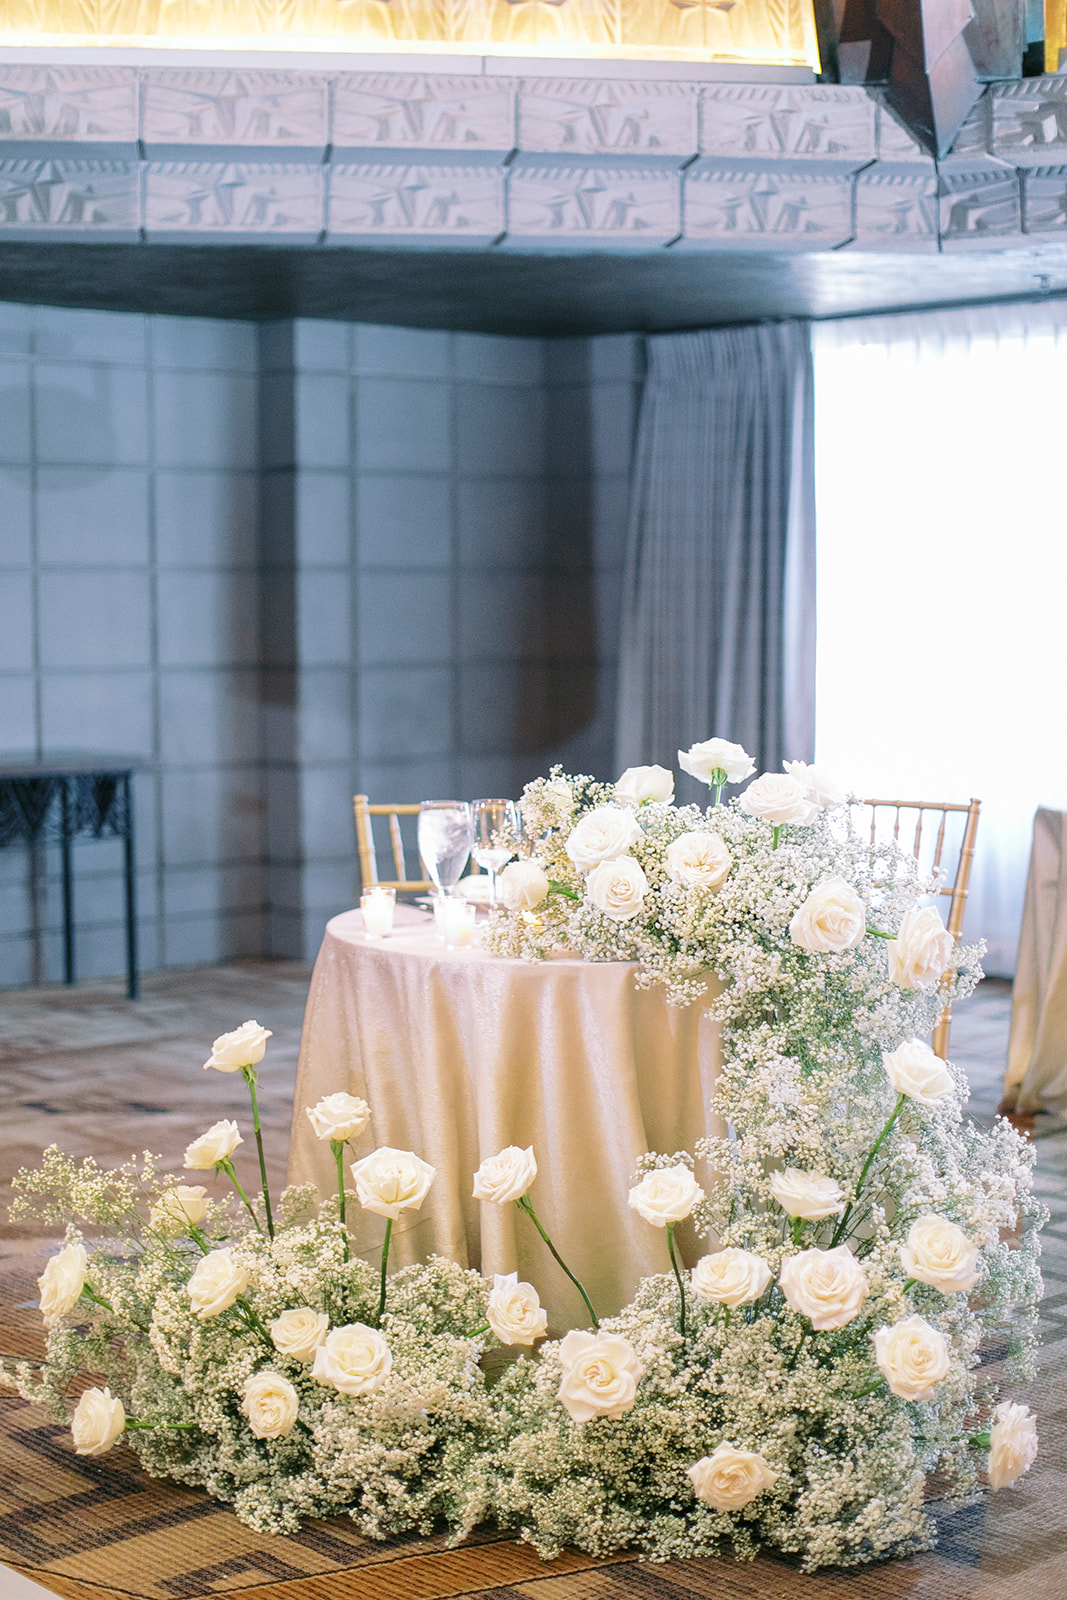 Lush, cascading baby's breath and roses garland from sweetheart table at wedding.